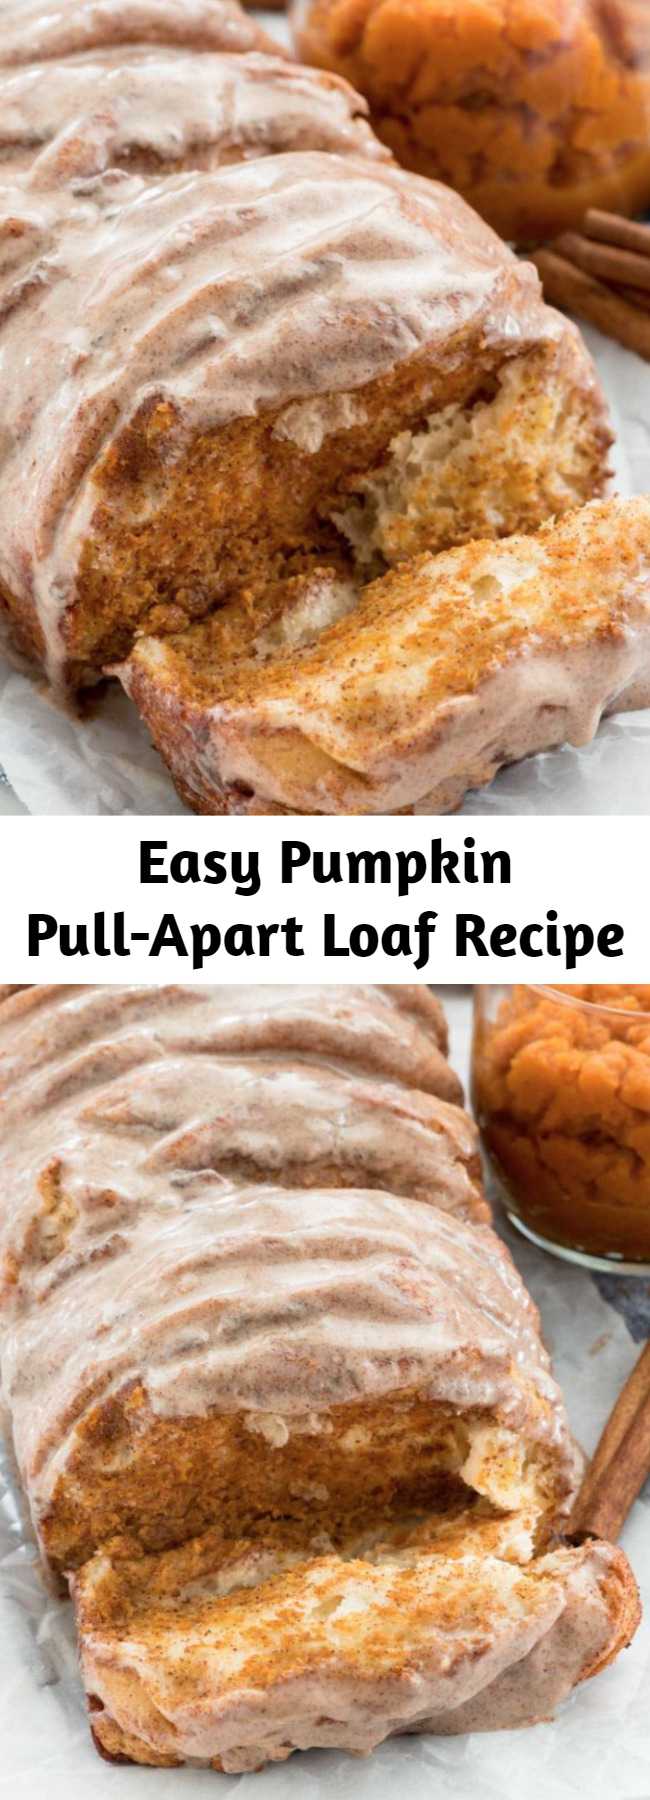 Easy Pumpkin Pull-Apart Loaf Recipe - Pumpkin pull-apart loaf is a flaky breakfast danish that you bake up easily, using refrigerated biscuit dough and pumpkin puree. It’s an easy brunch recipe, but it also makes the perfect snack or easy pumpkin dessert recipe!